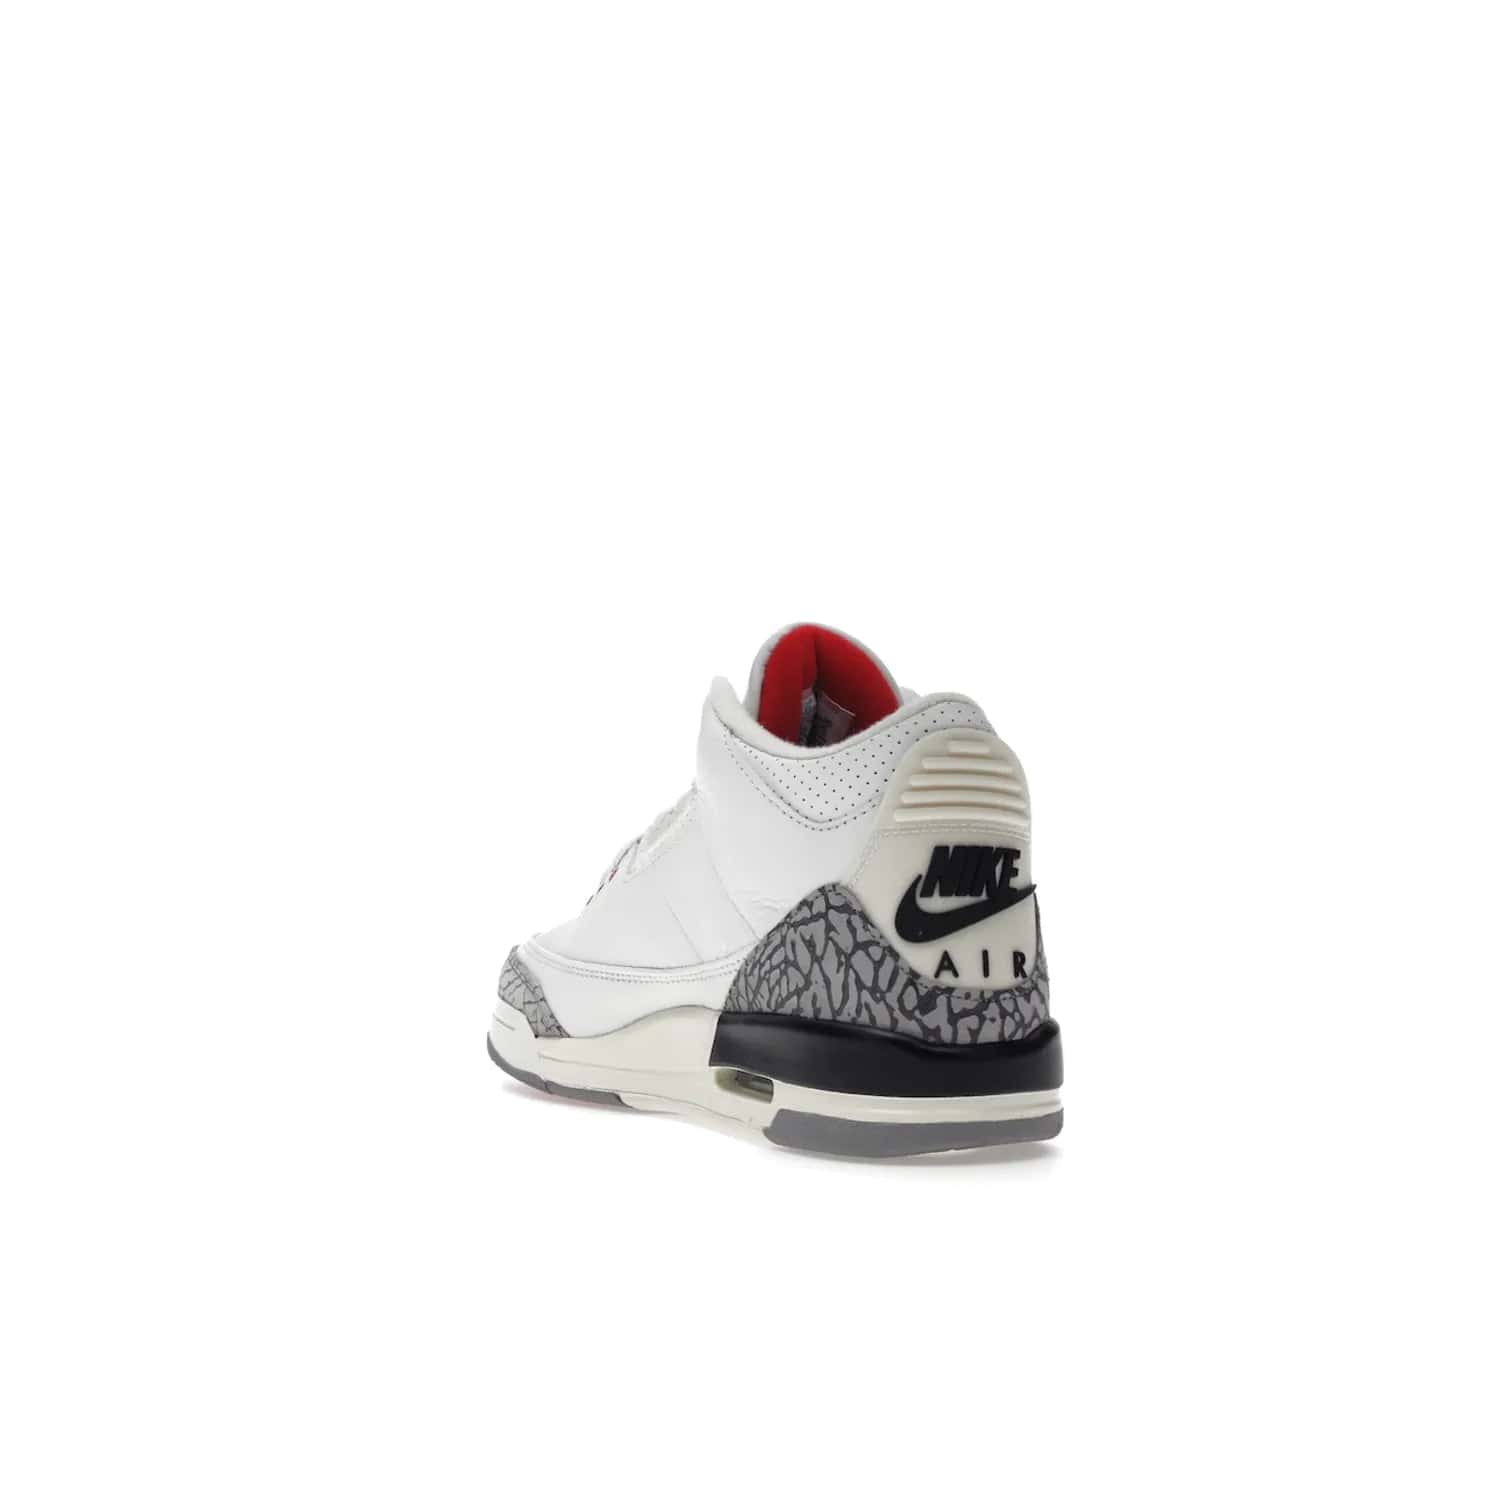 Jordan 3 Retro White Cement Reimagined (GS) - Image 25 - Only at www.BallersClubKickz.com - Grab the perfect blend of modern design and classic style with the Jordan 3 Retro White Cement Reimagined (GS). Features Summit White, Fire Red, Black, and Cement Grey colorway, iconic Jordan logo embroidered on the tongue, and “Nike Air” branding. Limited availability, get your pair before March 11th 2023.